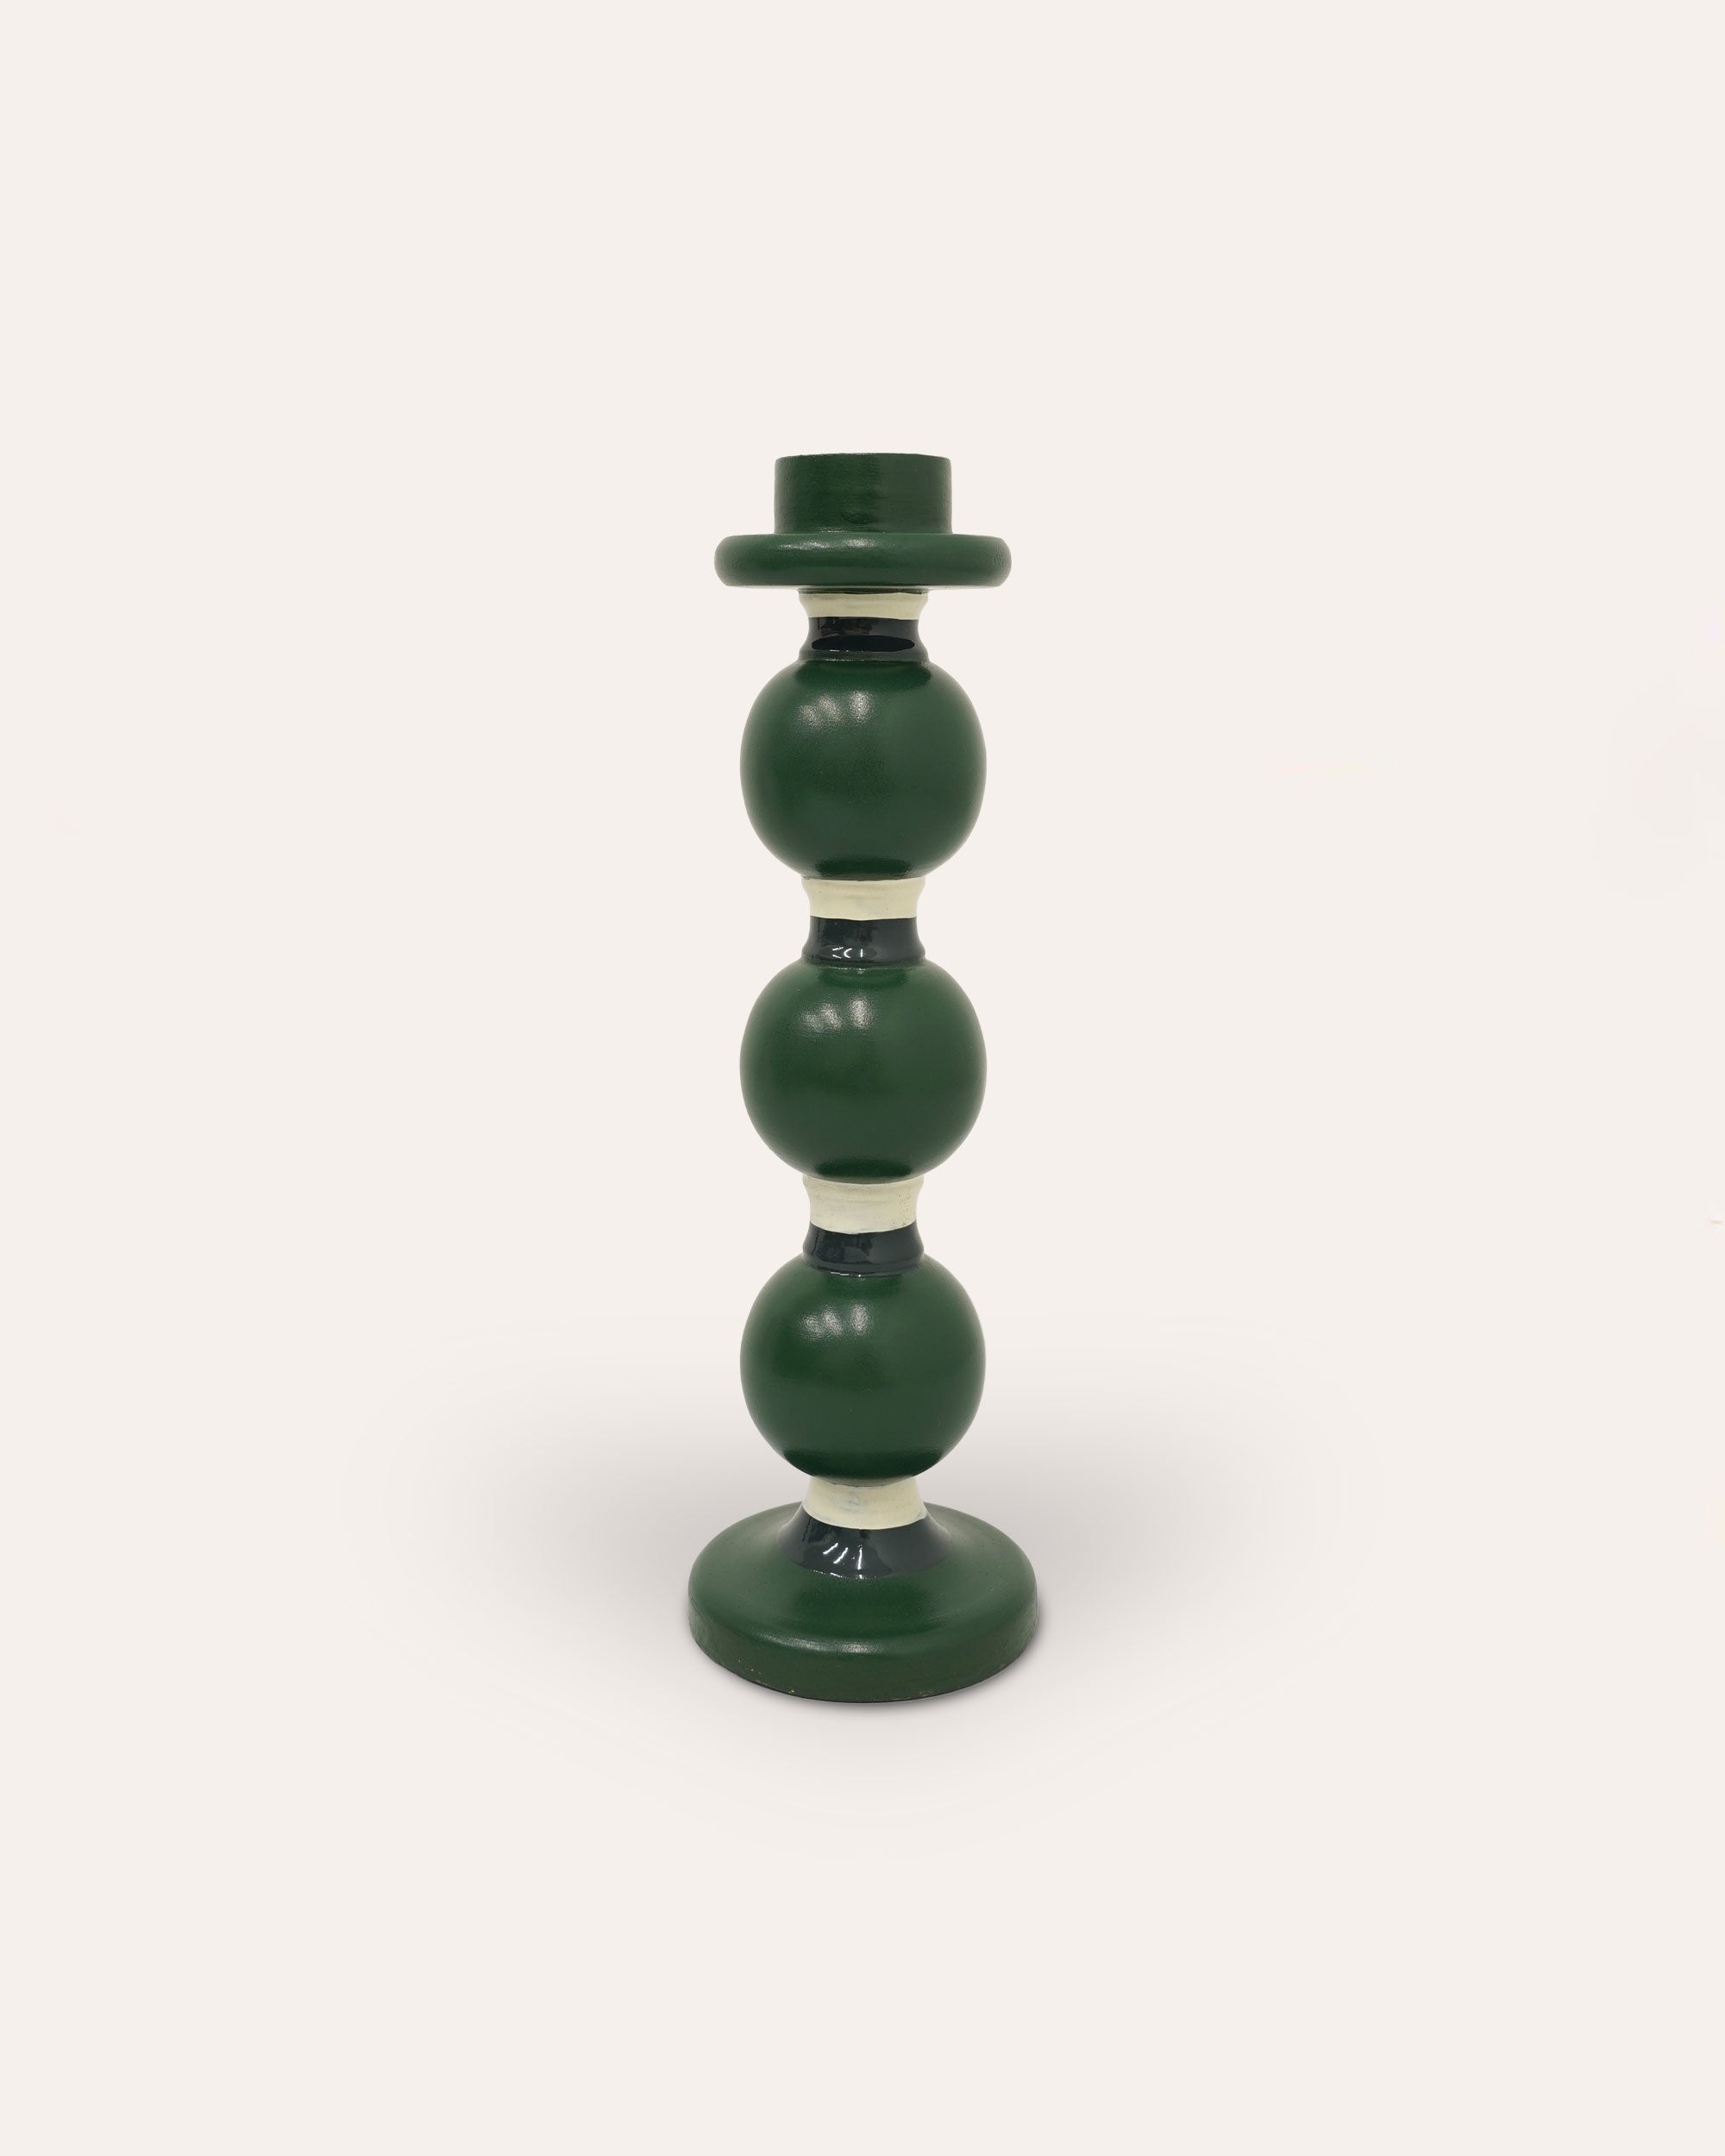 The Sensational Stripey Candlestick - The Dark Green and Blue